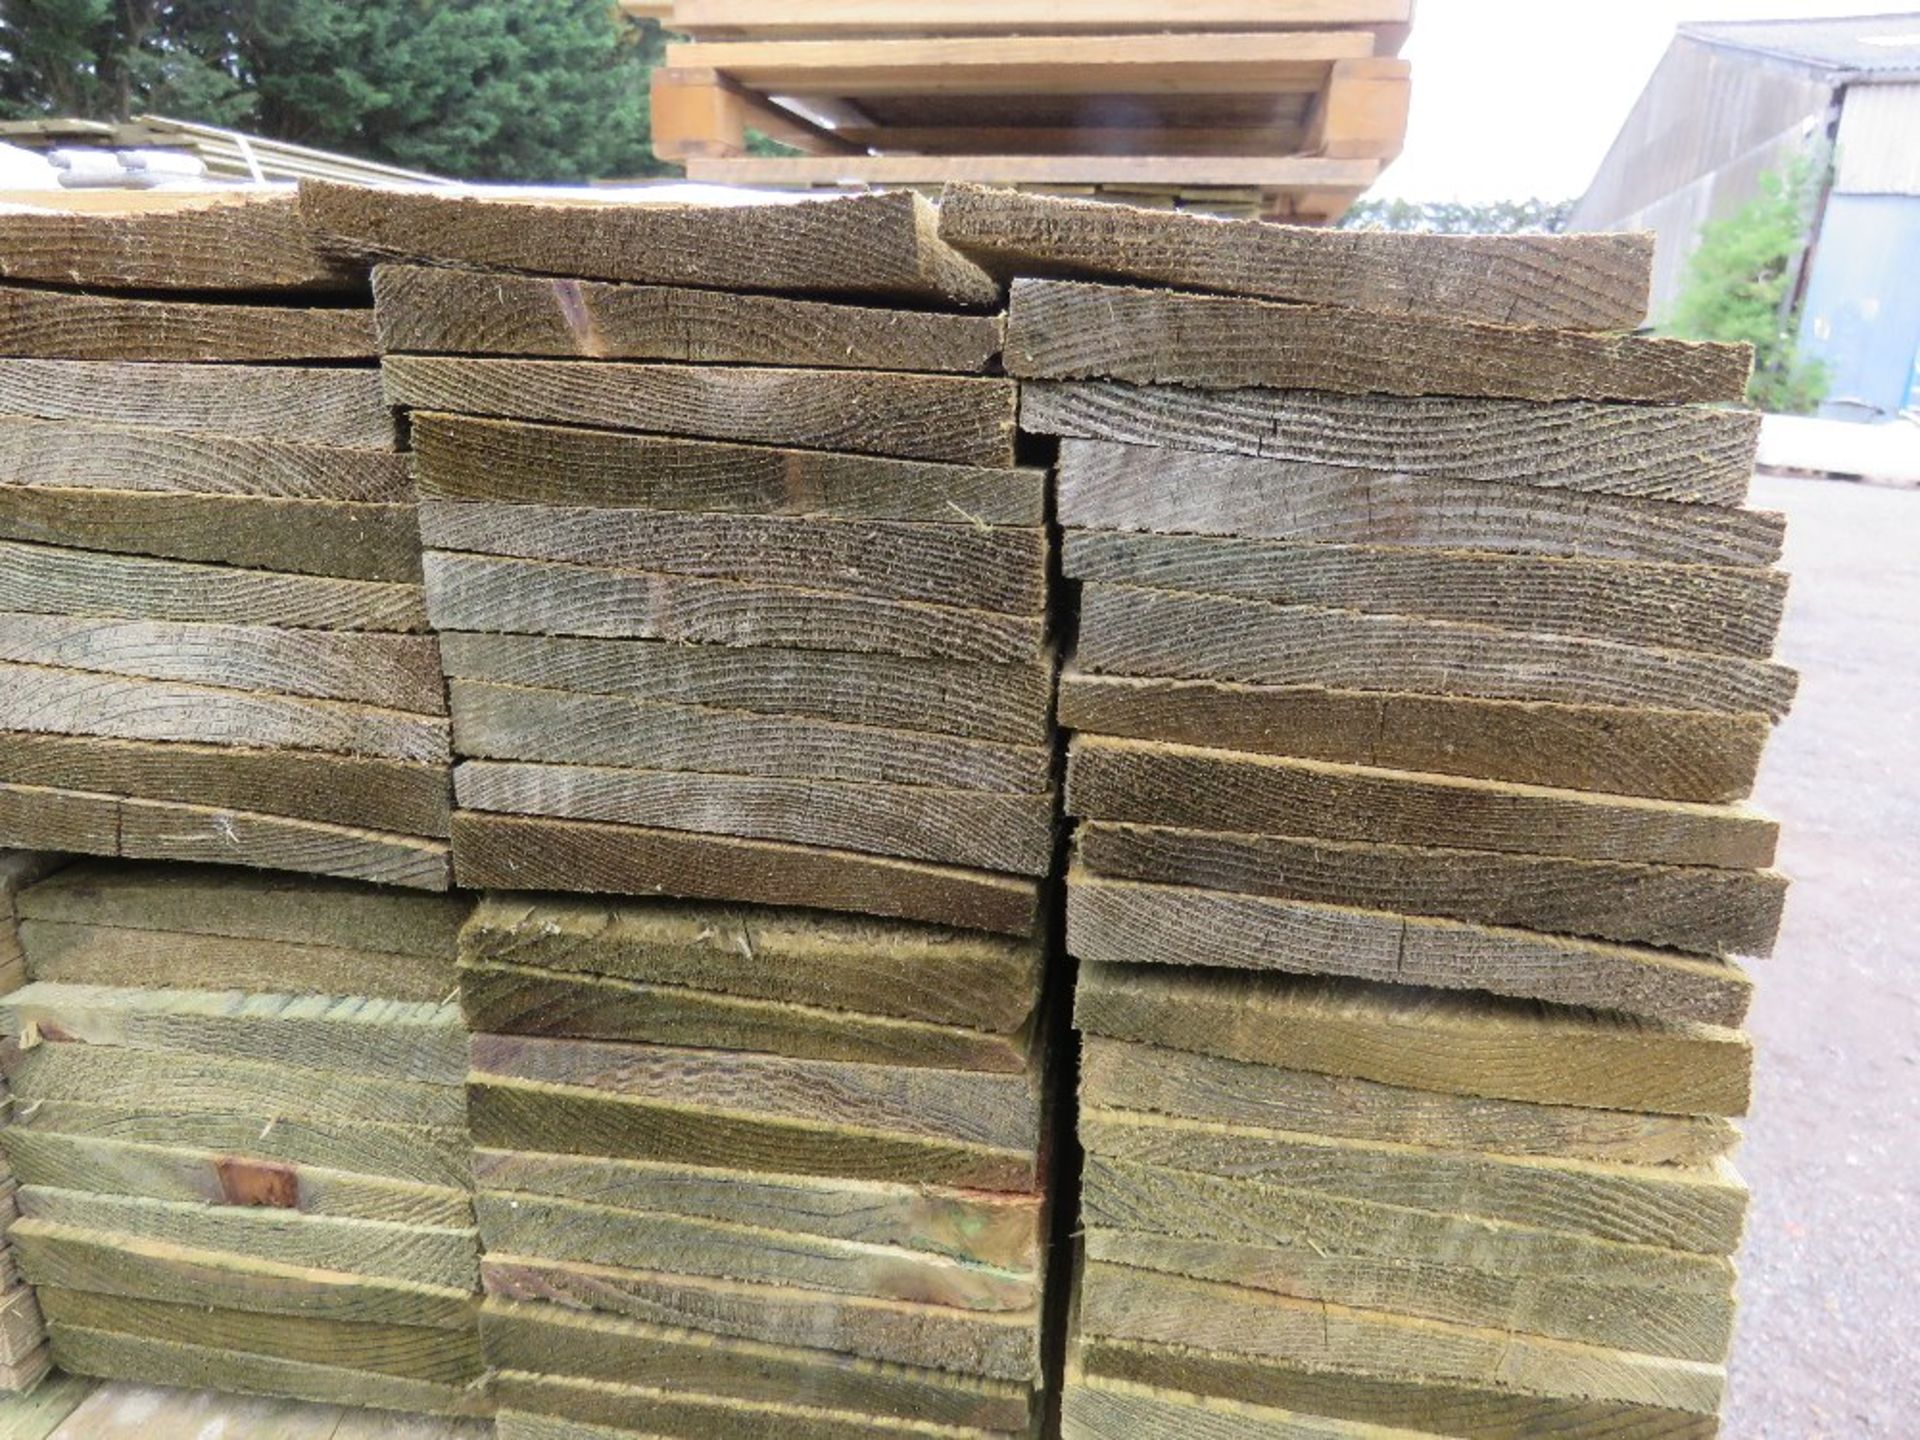 LARGE PACK OF PRESSURE TREATED FEATHER EDGE FENCE CLADDING TIMBER BOARDS. 1.35M LENGTH X 100MM WIDTH - Image 3 of 3